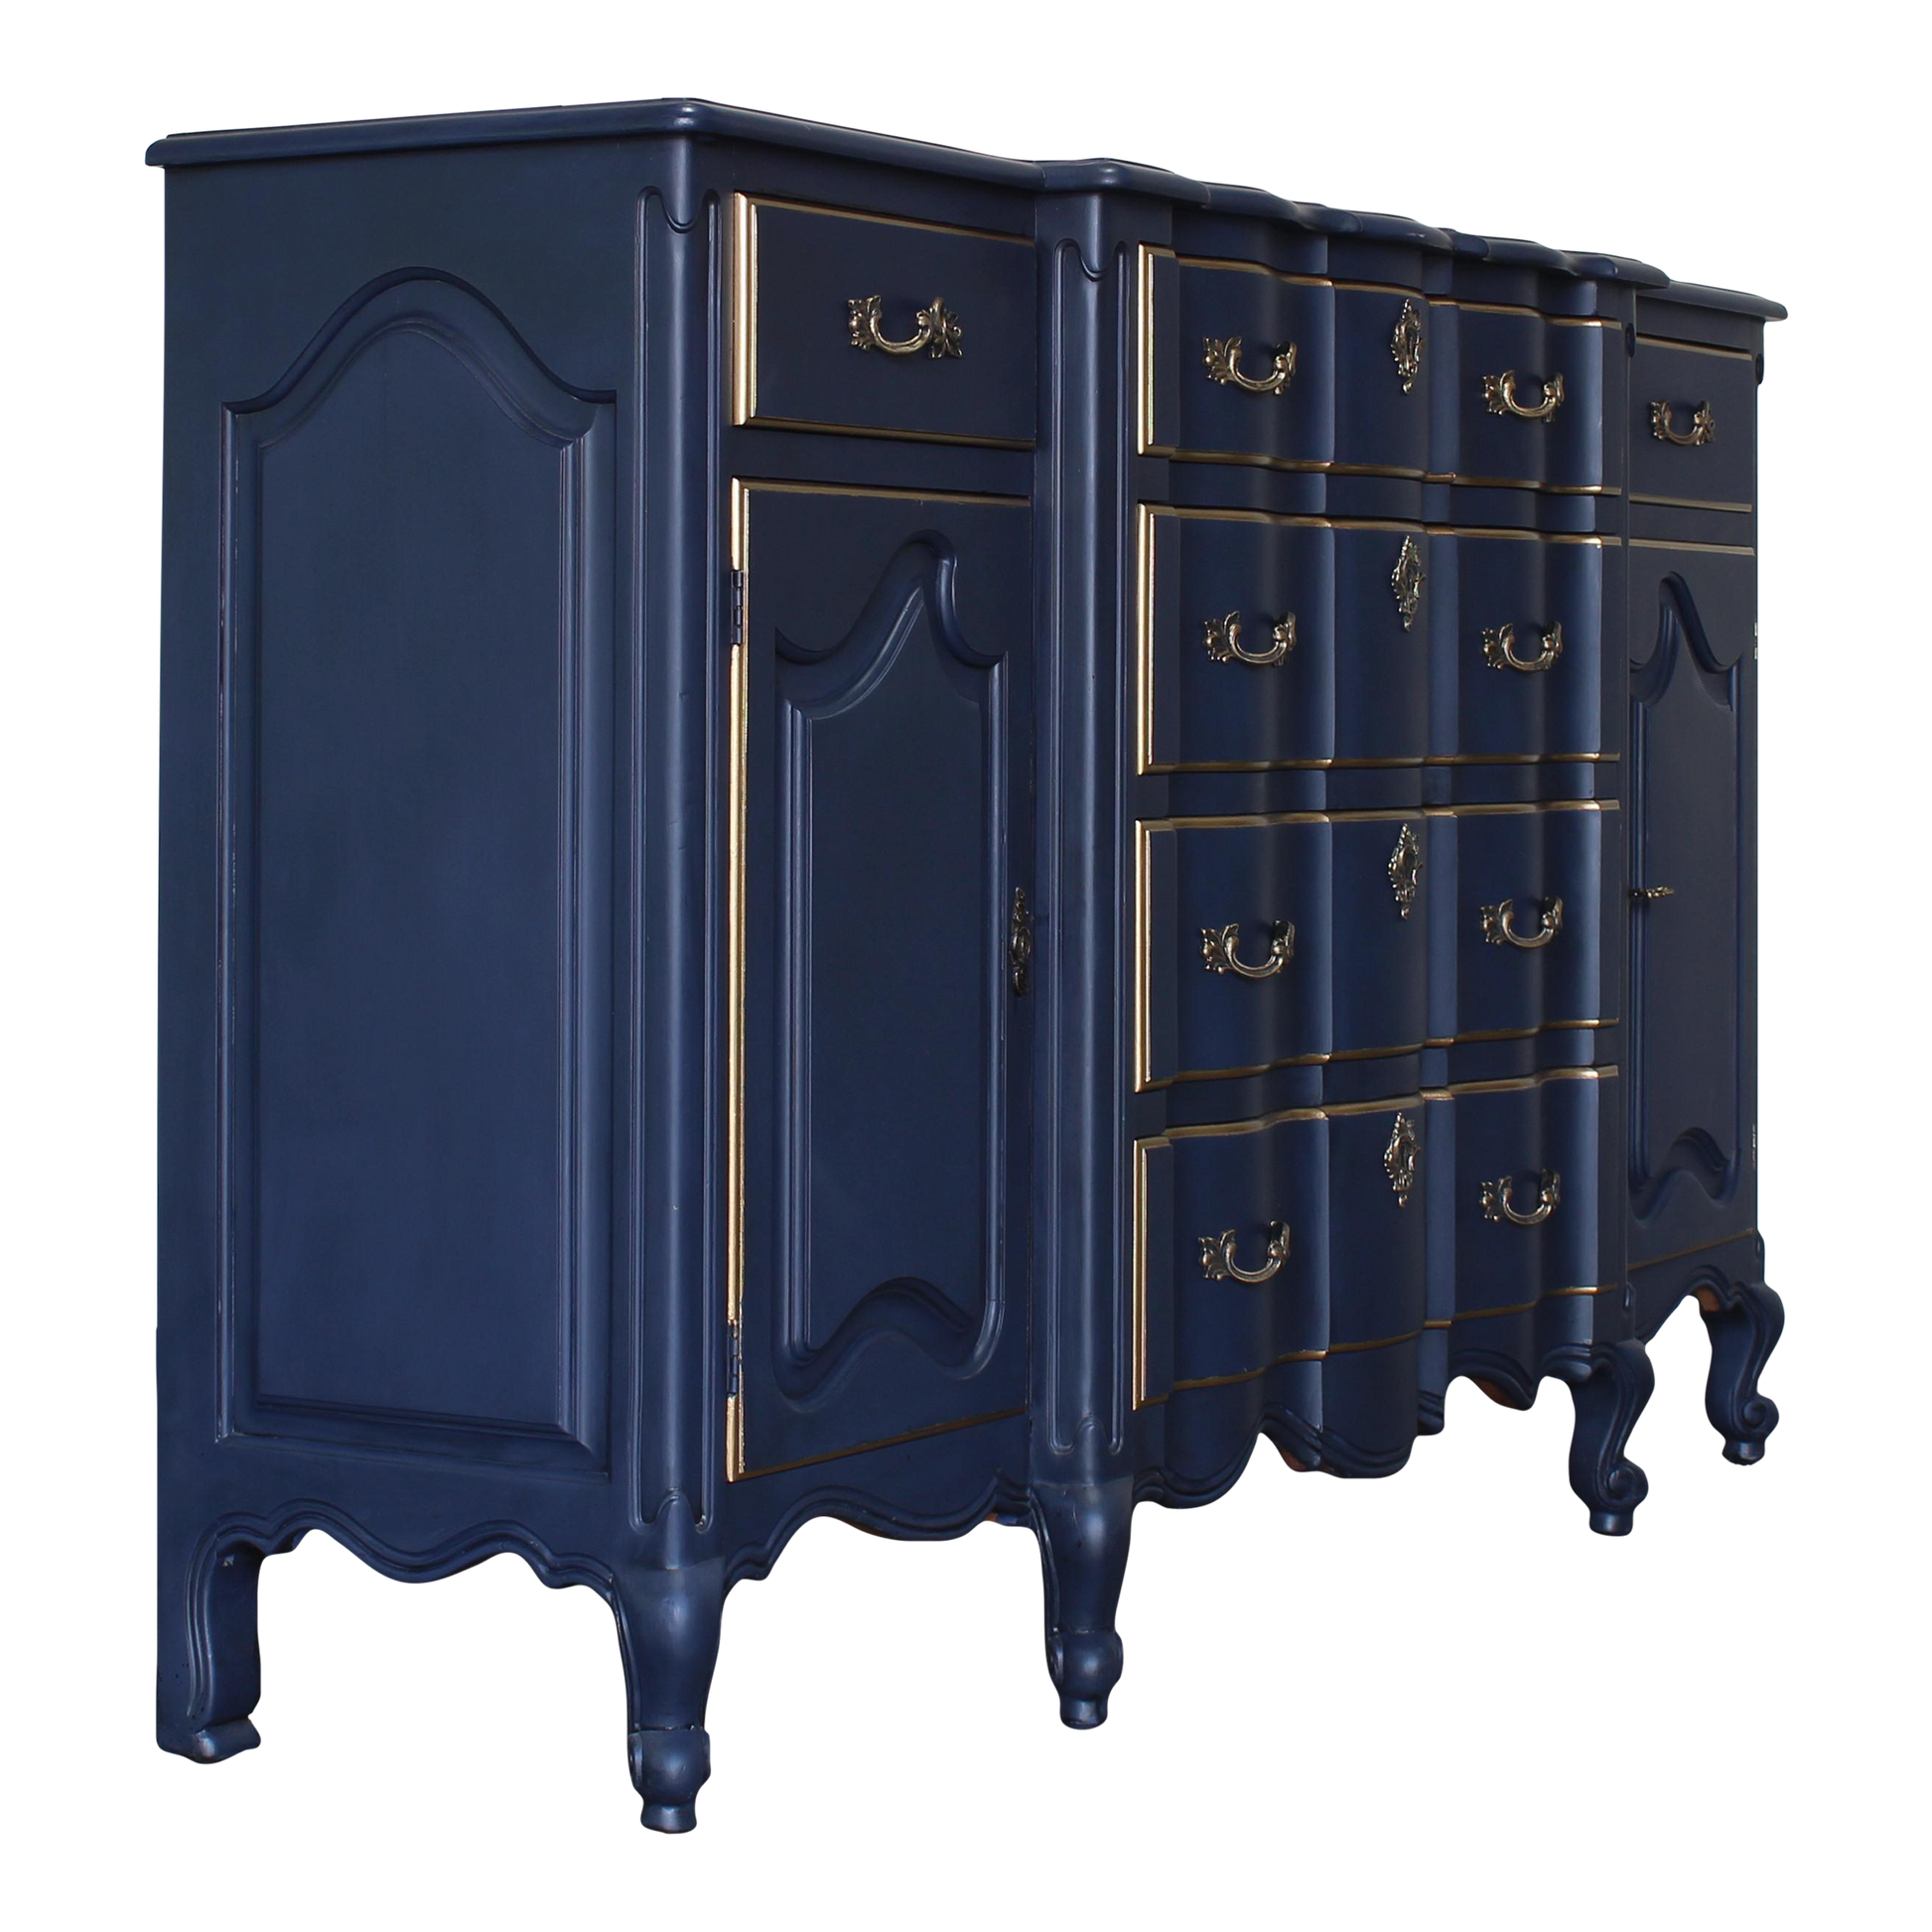 Vintage French style cabinet.  This cabinet is solid built with six drawers and side shelves.  This cabinet is professionally refinished in blue with an antique glaze and gold painted accents. The side doors have a key, door and drawers work well.  Dimensions; 60 Width x 18" Depth x 37" Height. 